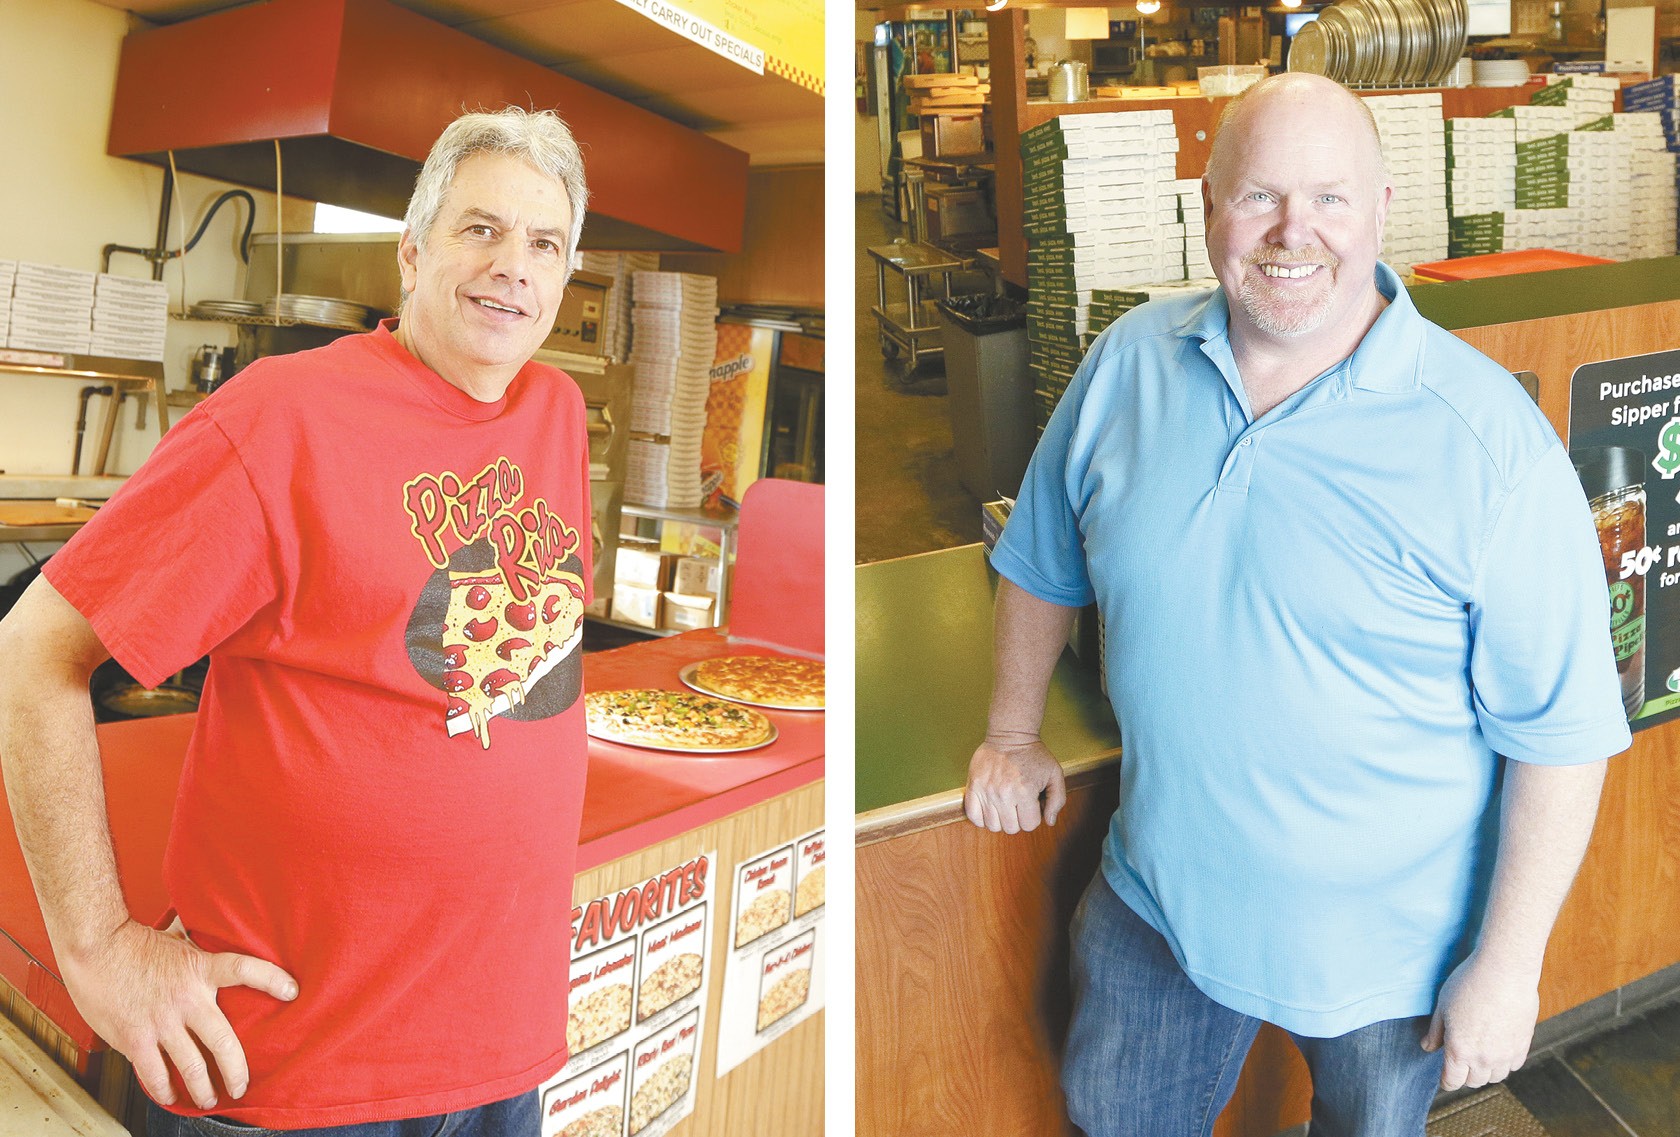 Local delivery chains Pizza Rita and Pizza Pipeline have been sending tasty pies out across the region for three decades